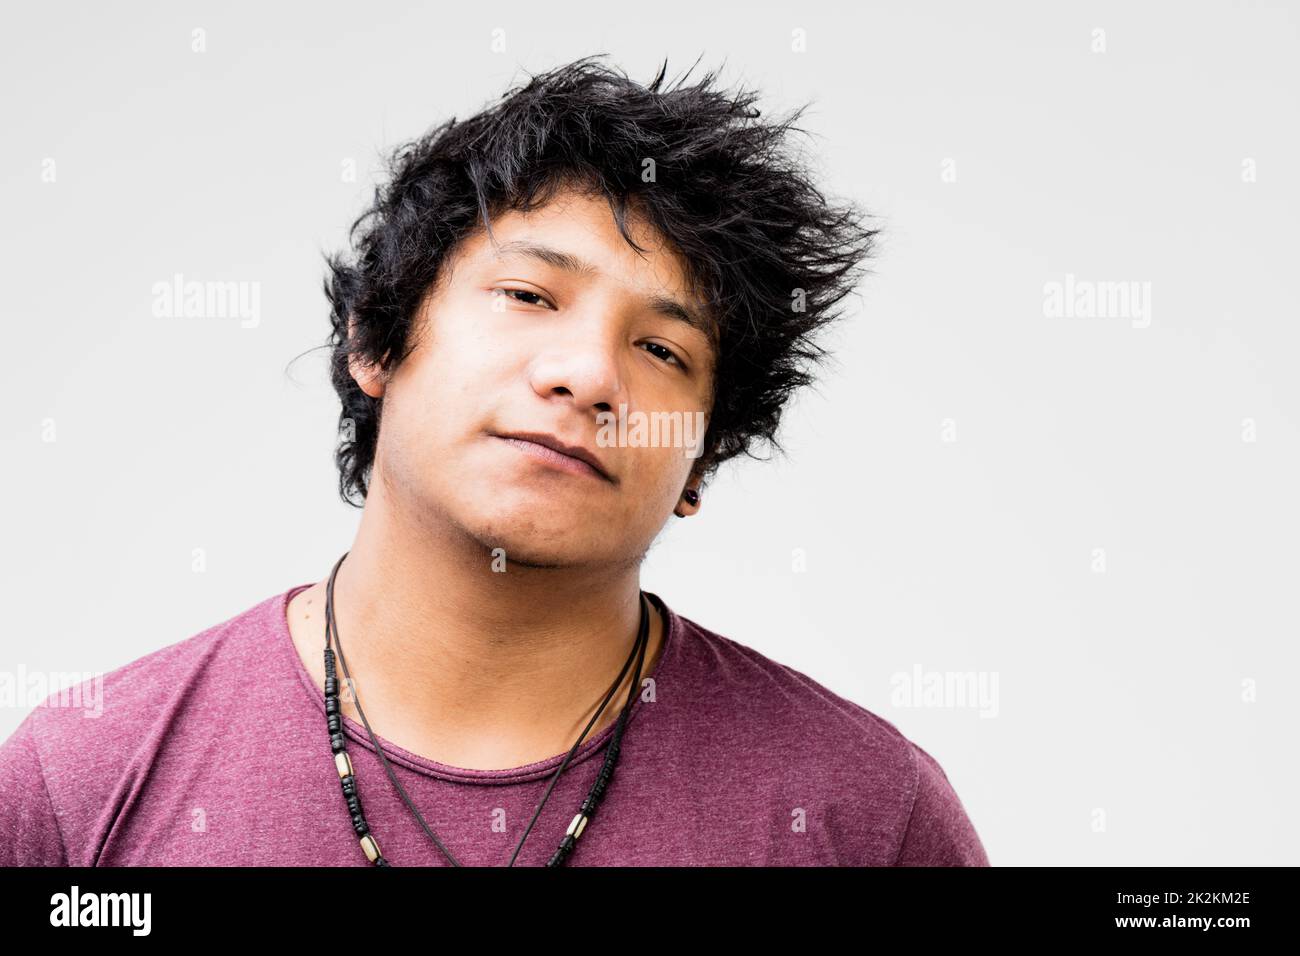 concerned South American young man Stock Photo